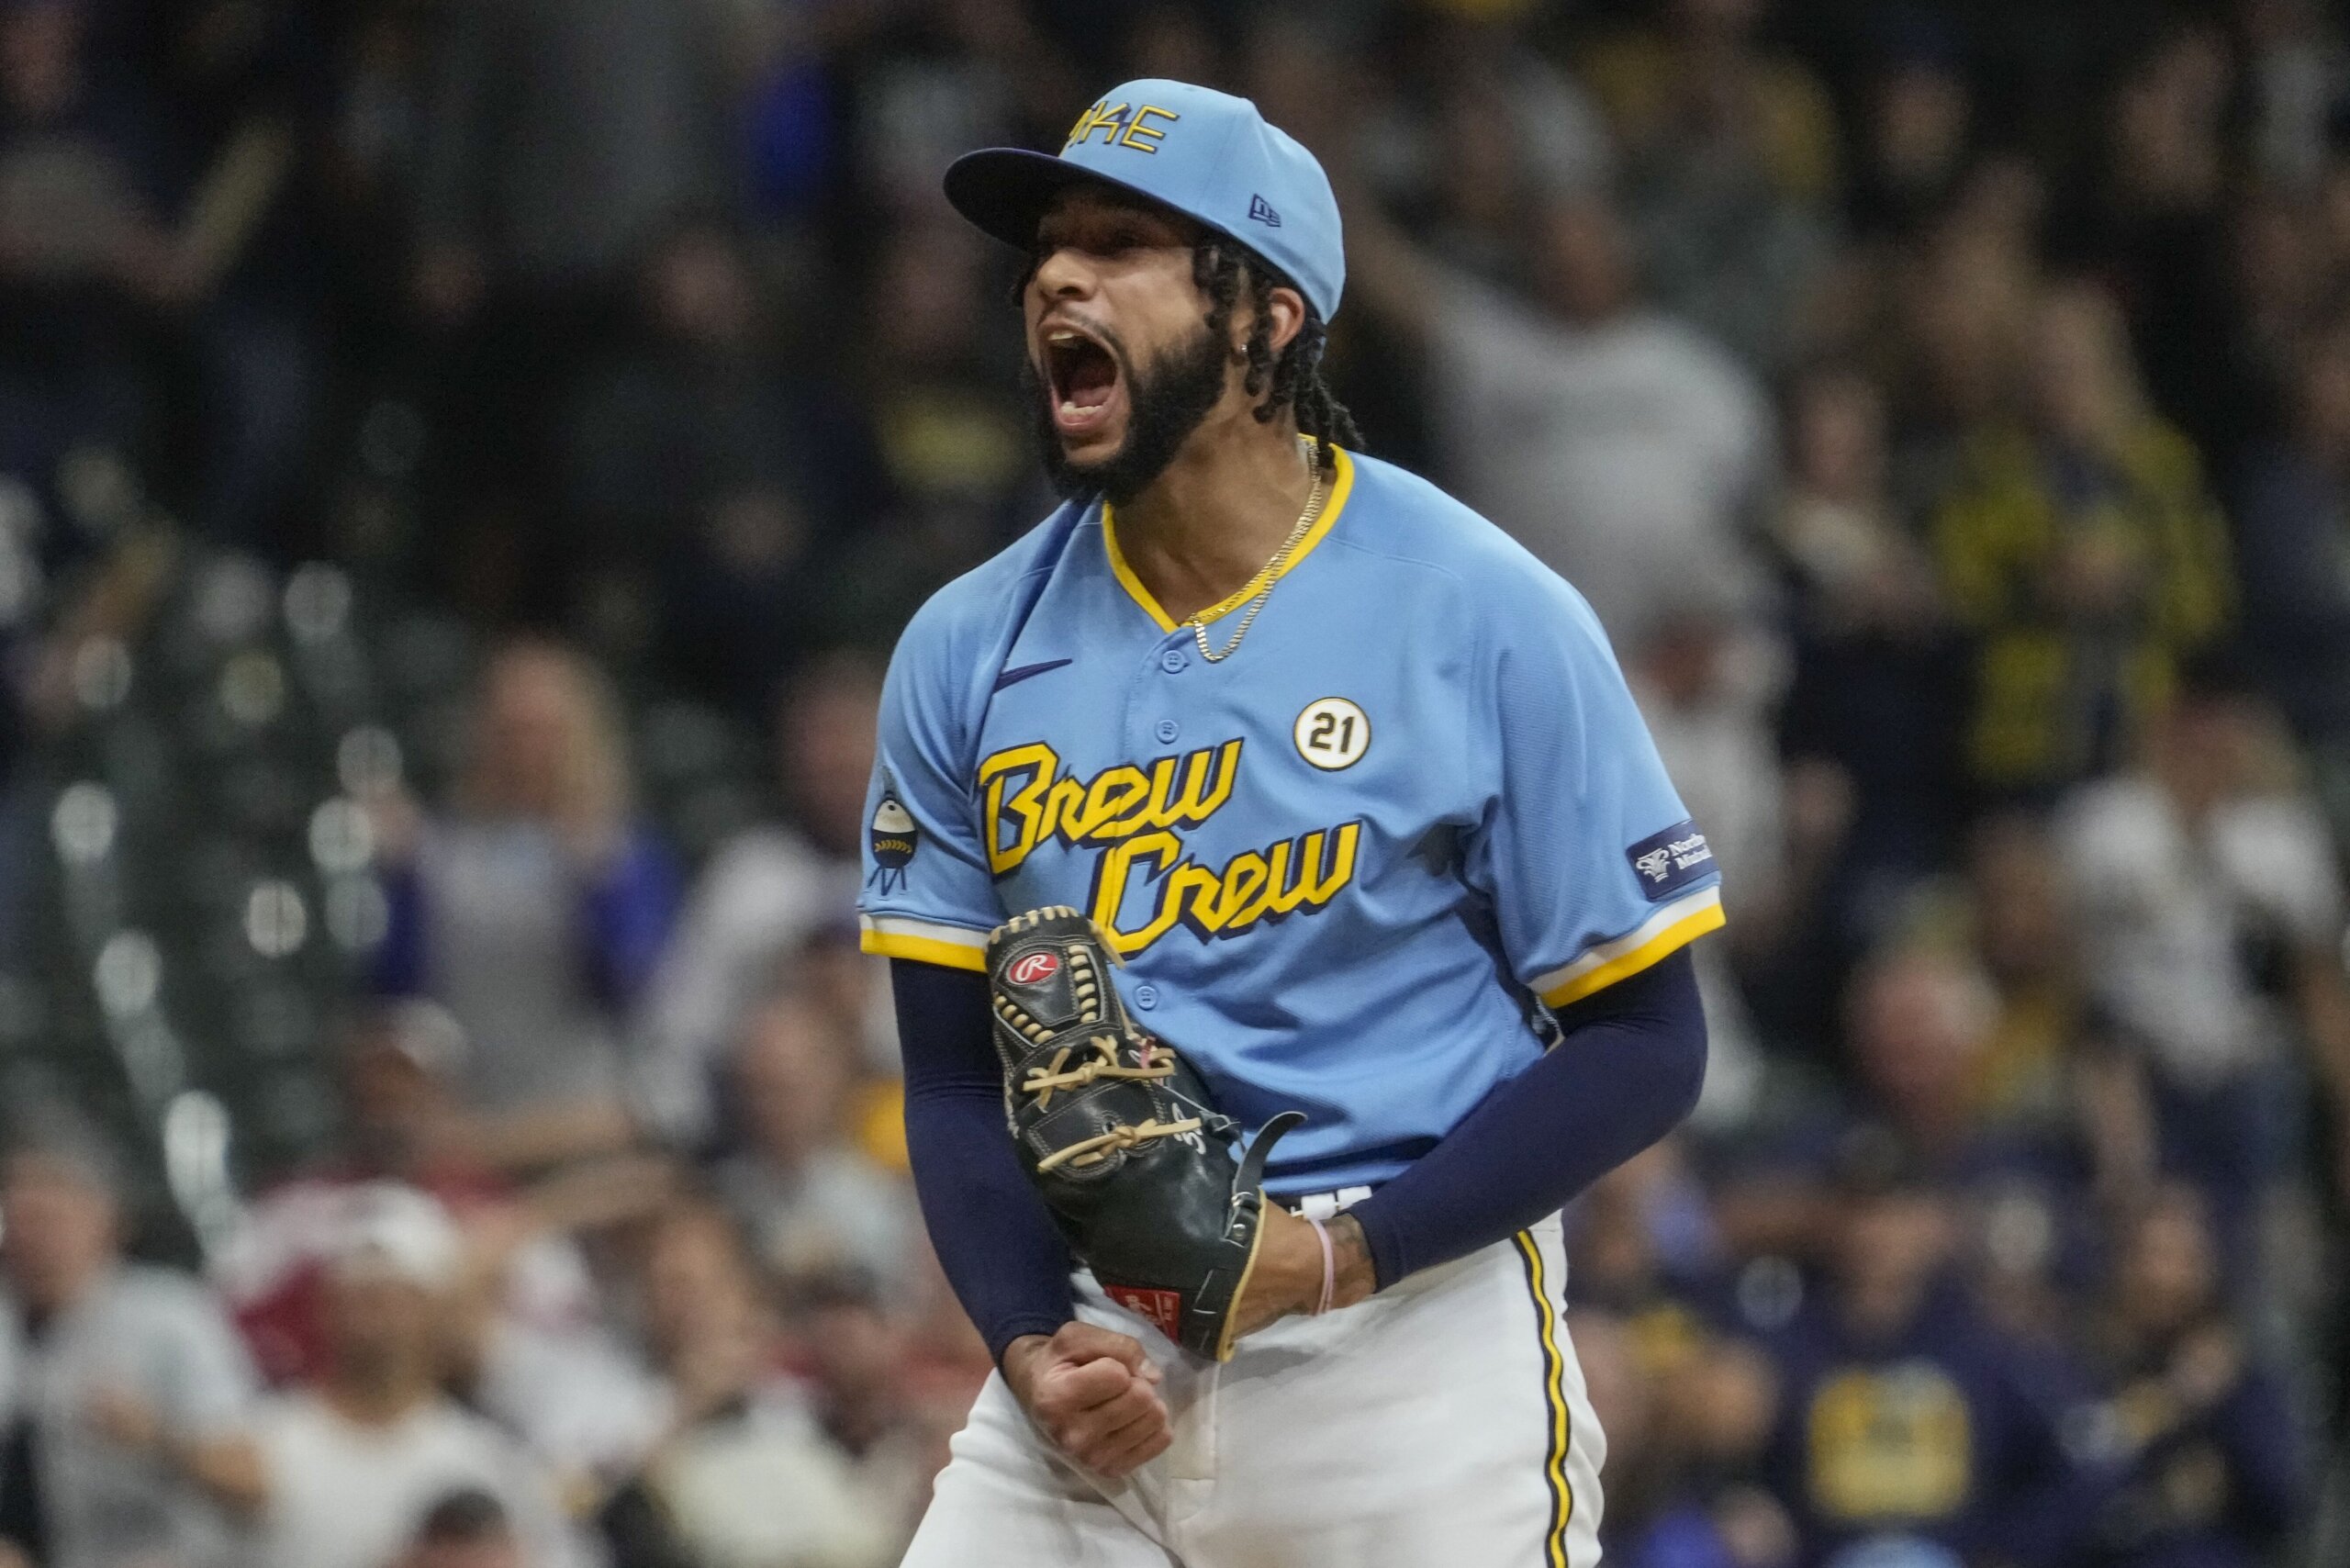 Northwestern Mutual sponsors jersey patch on Brewers uniforms